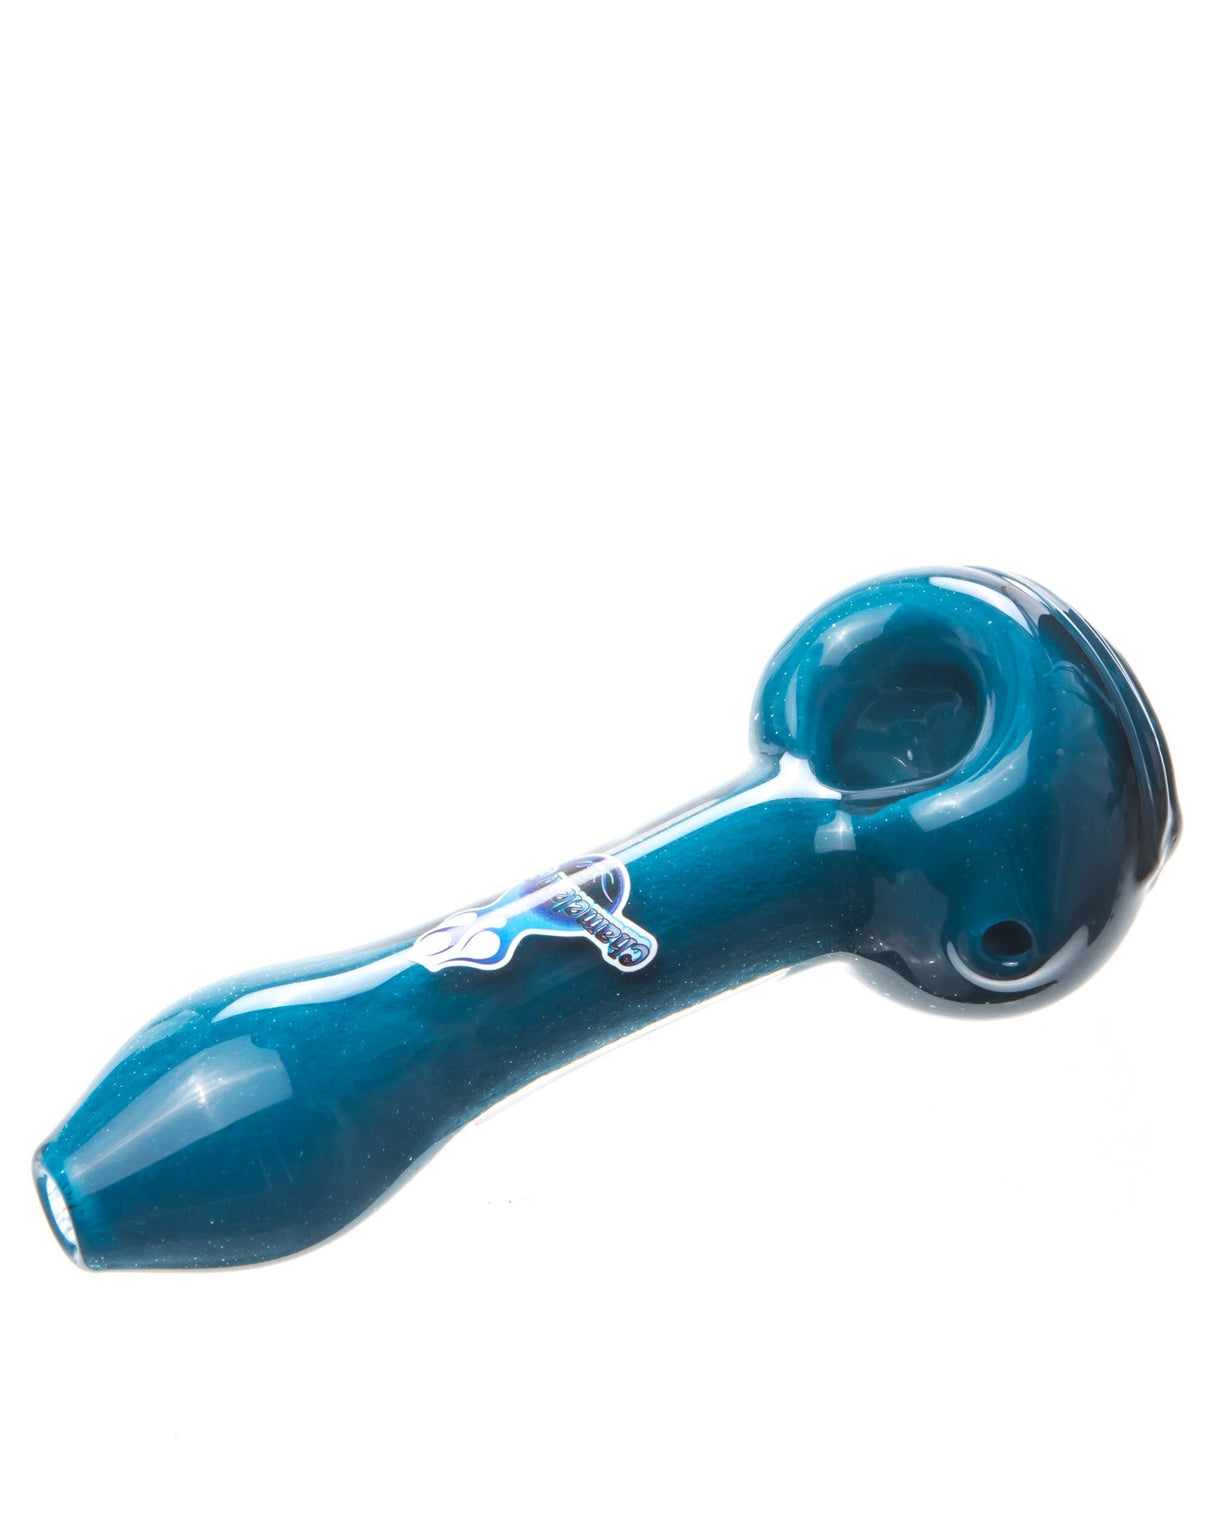 Chameleon Glass Teal Cyclops Pipe made of Borosilicate, side view on white background